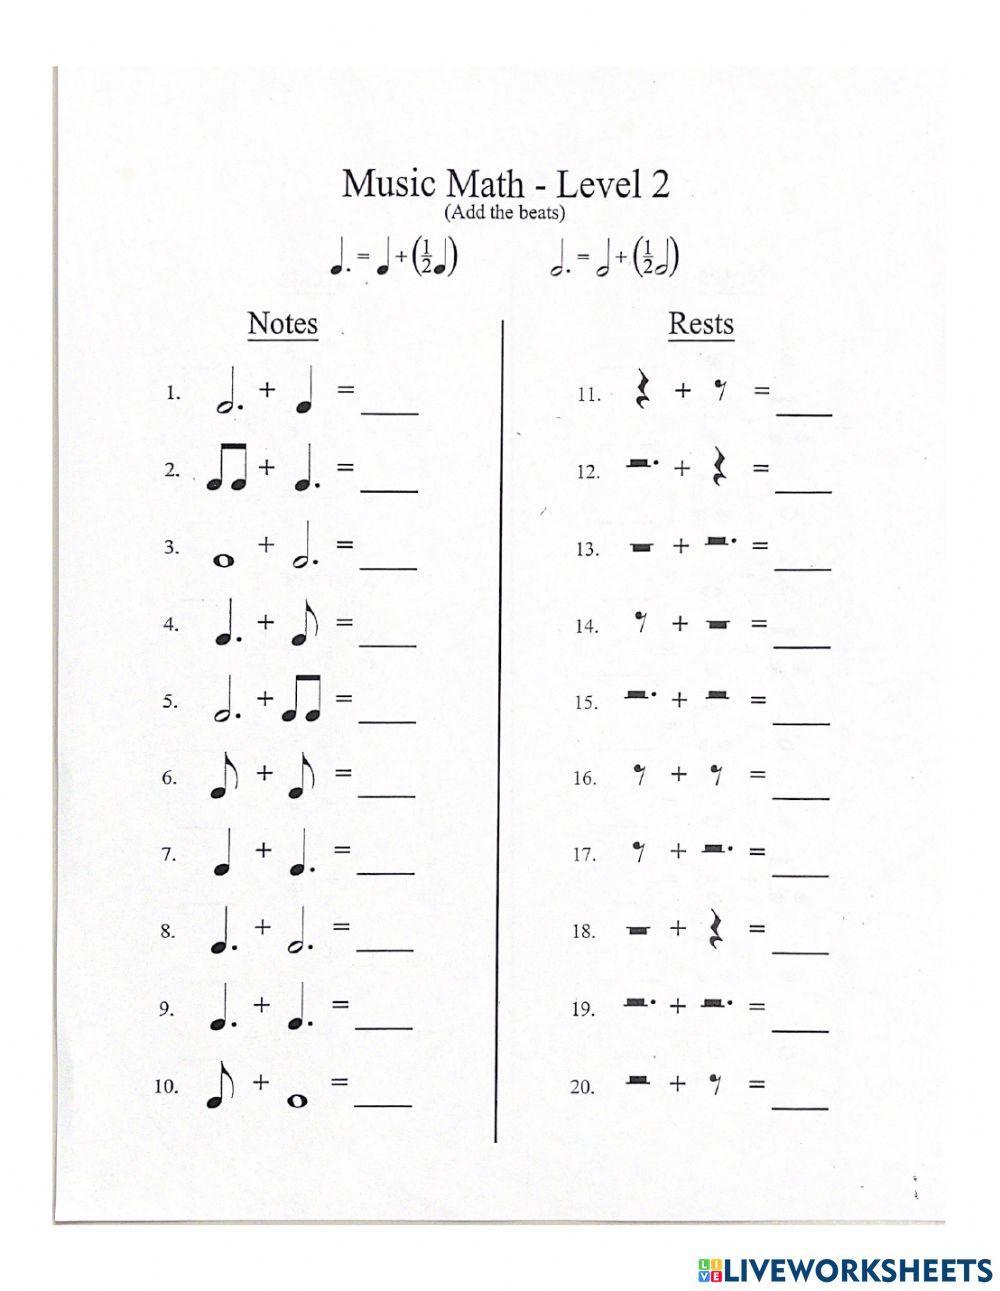 Clef Identification and Music Math - No Rests